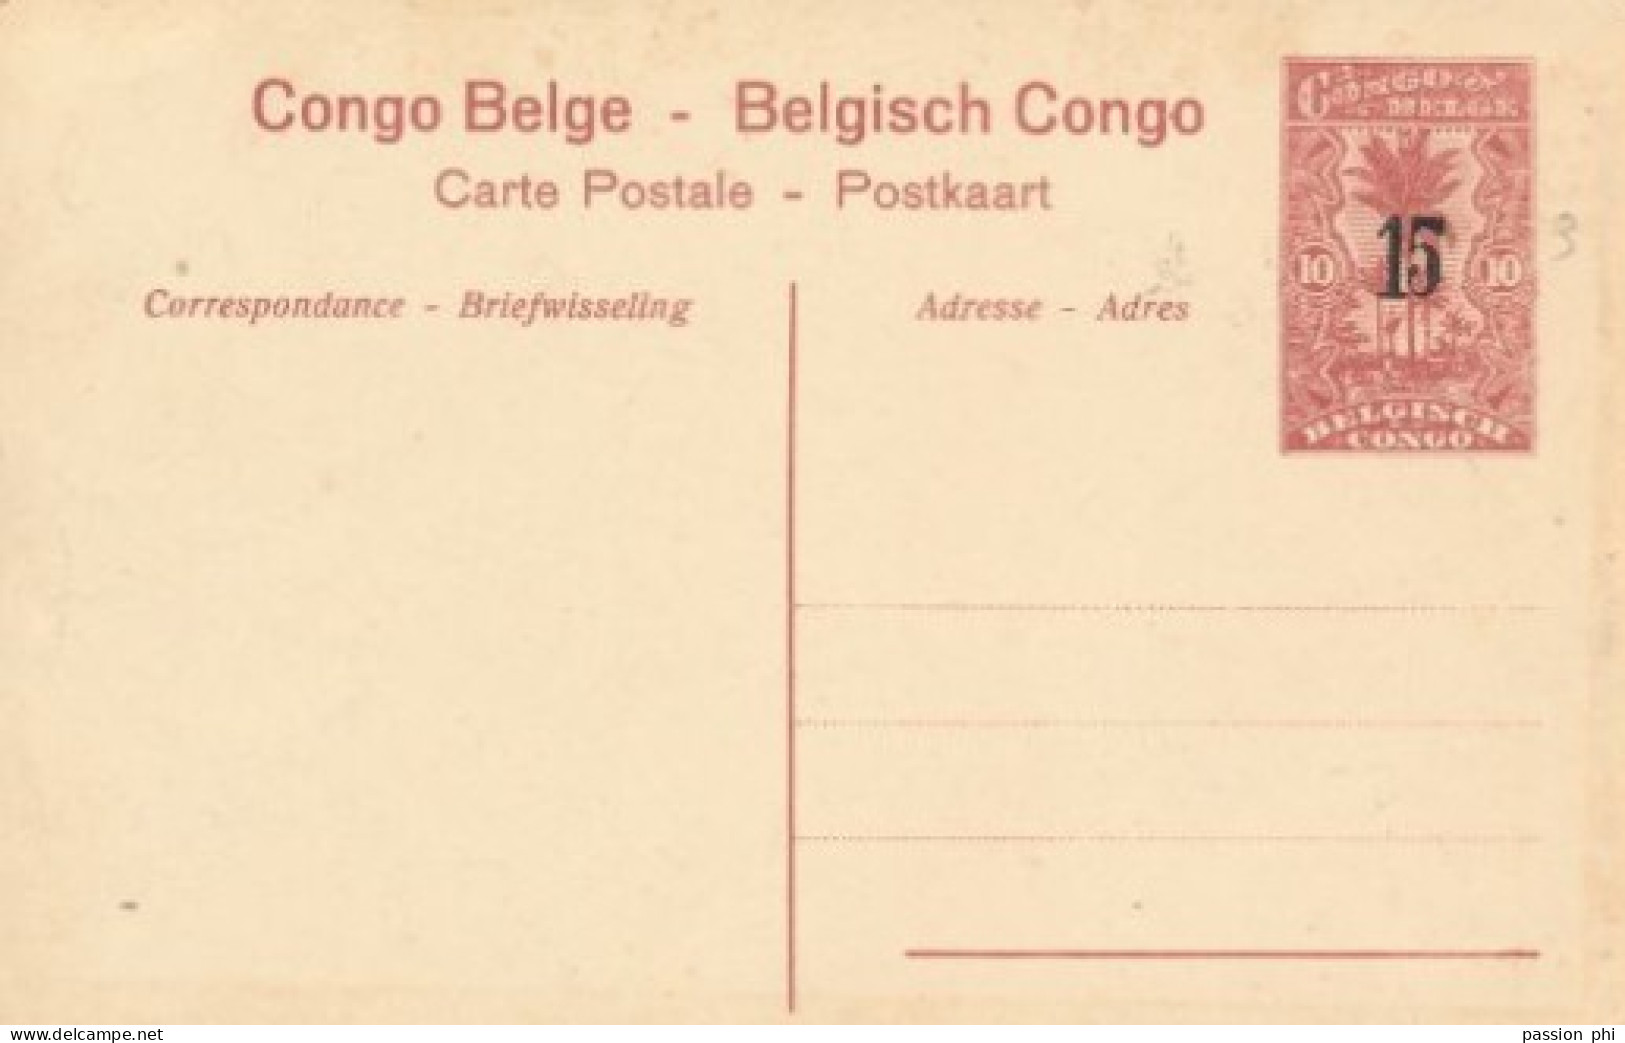 BELGIAN CONGO PPS SBEP 53 VIEW 17 UNUSED - Stamped Stationery